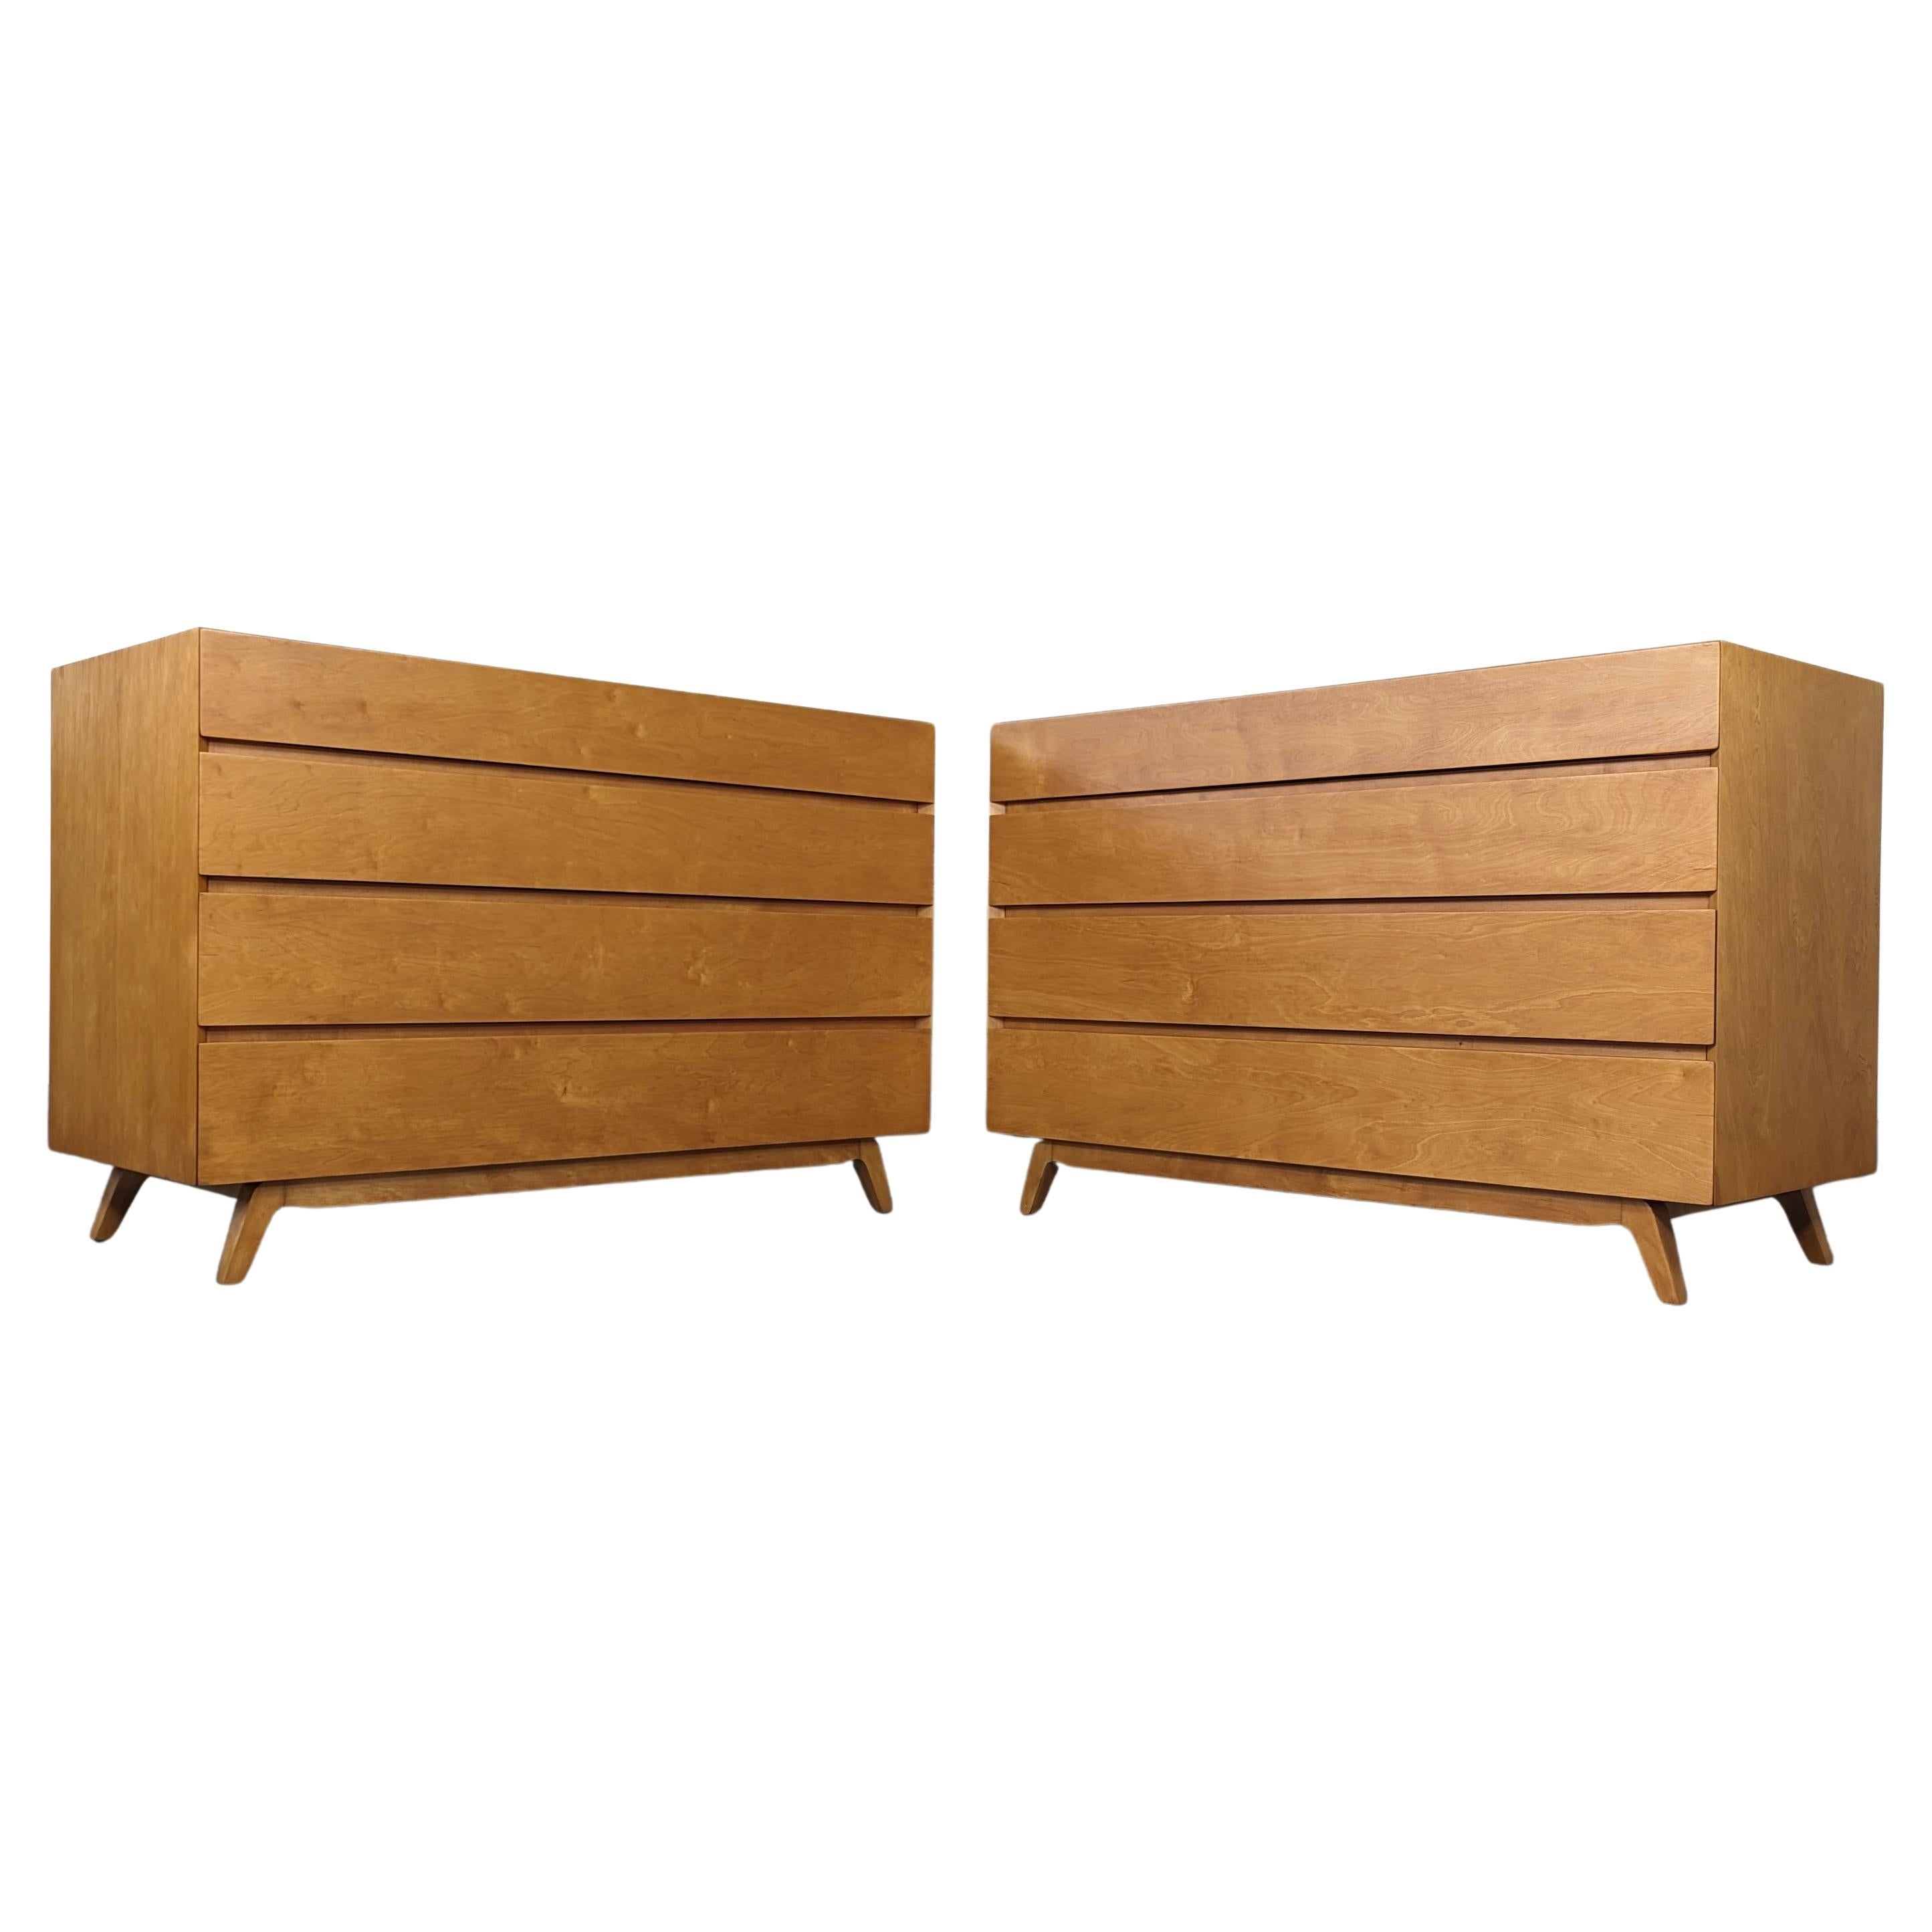 Mid Century Modern Maple Chest of Drawers Dresser by Edmond Spence, c1950s For Sale